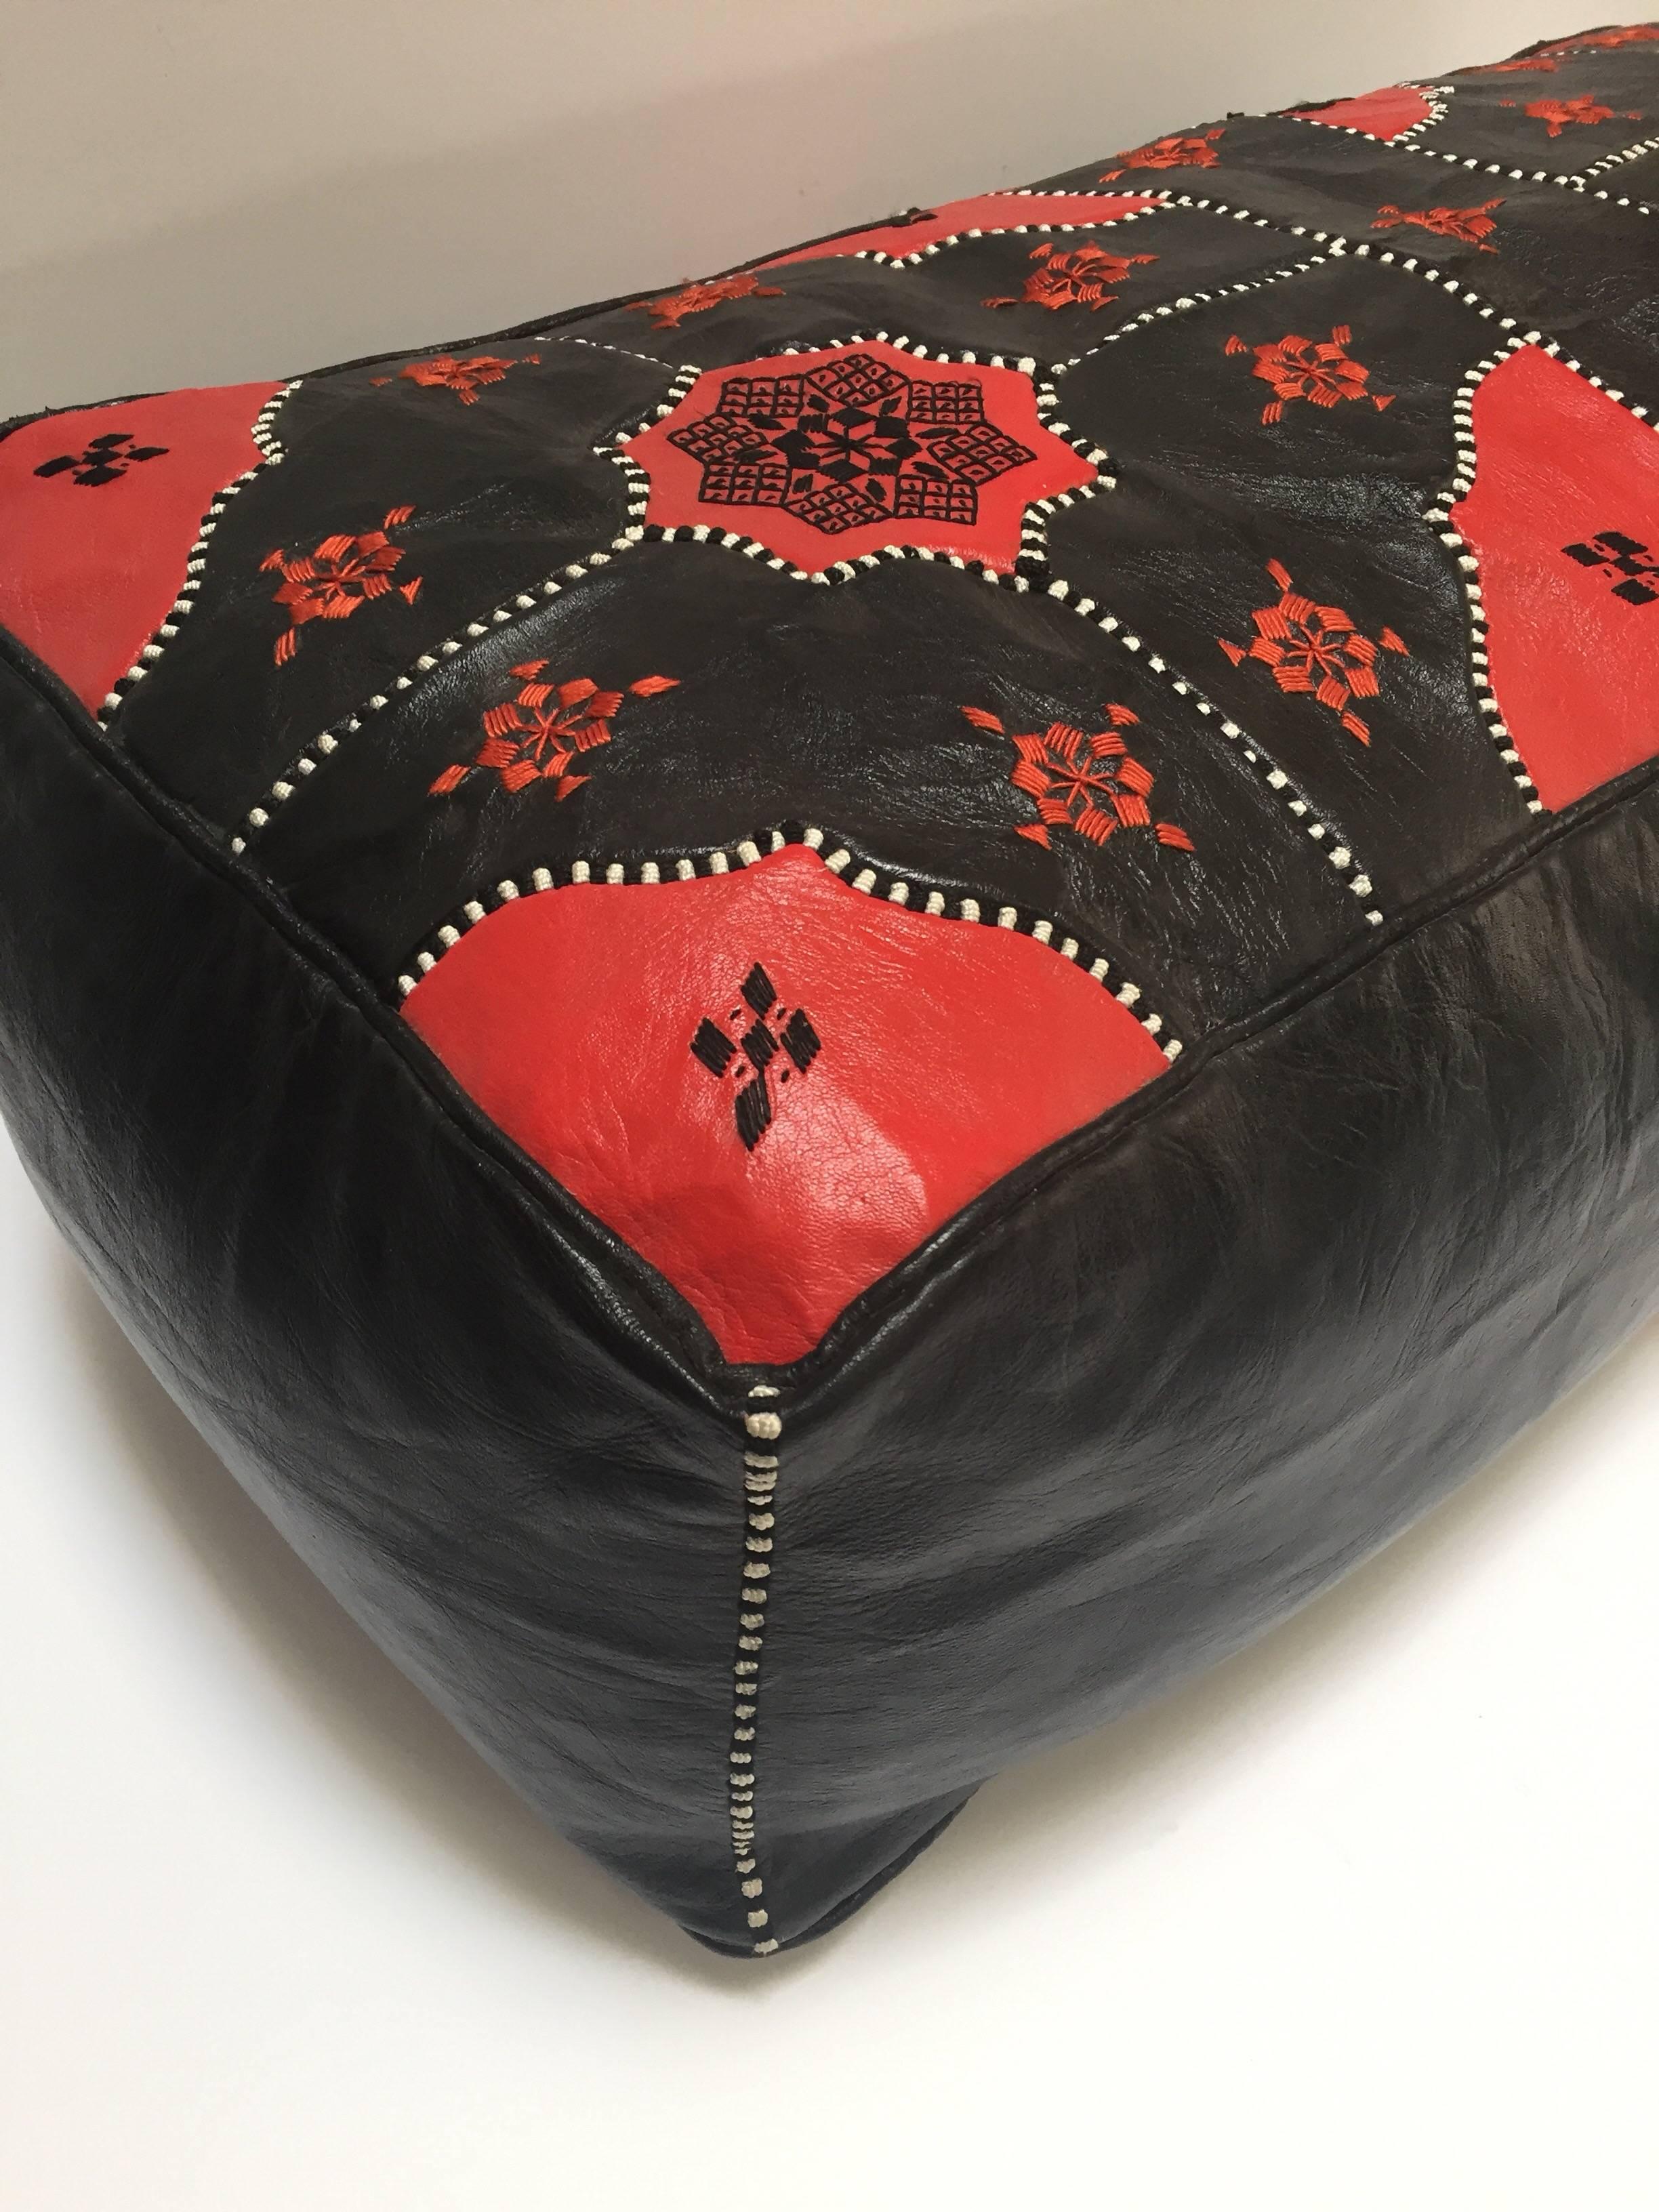 Moorish Vintage Moroccan Leather Rectangular Pouf in Red and Black For Sale